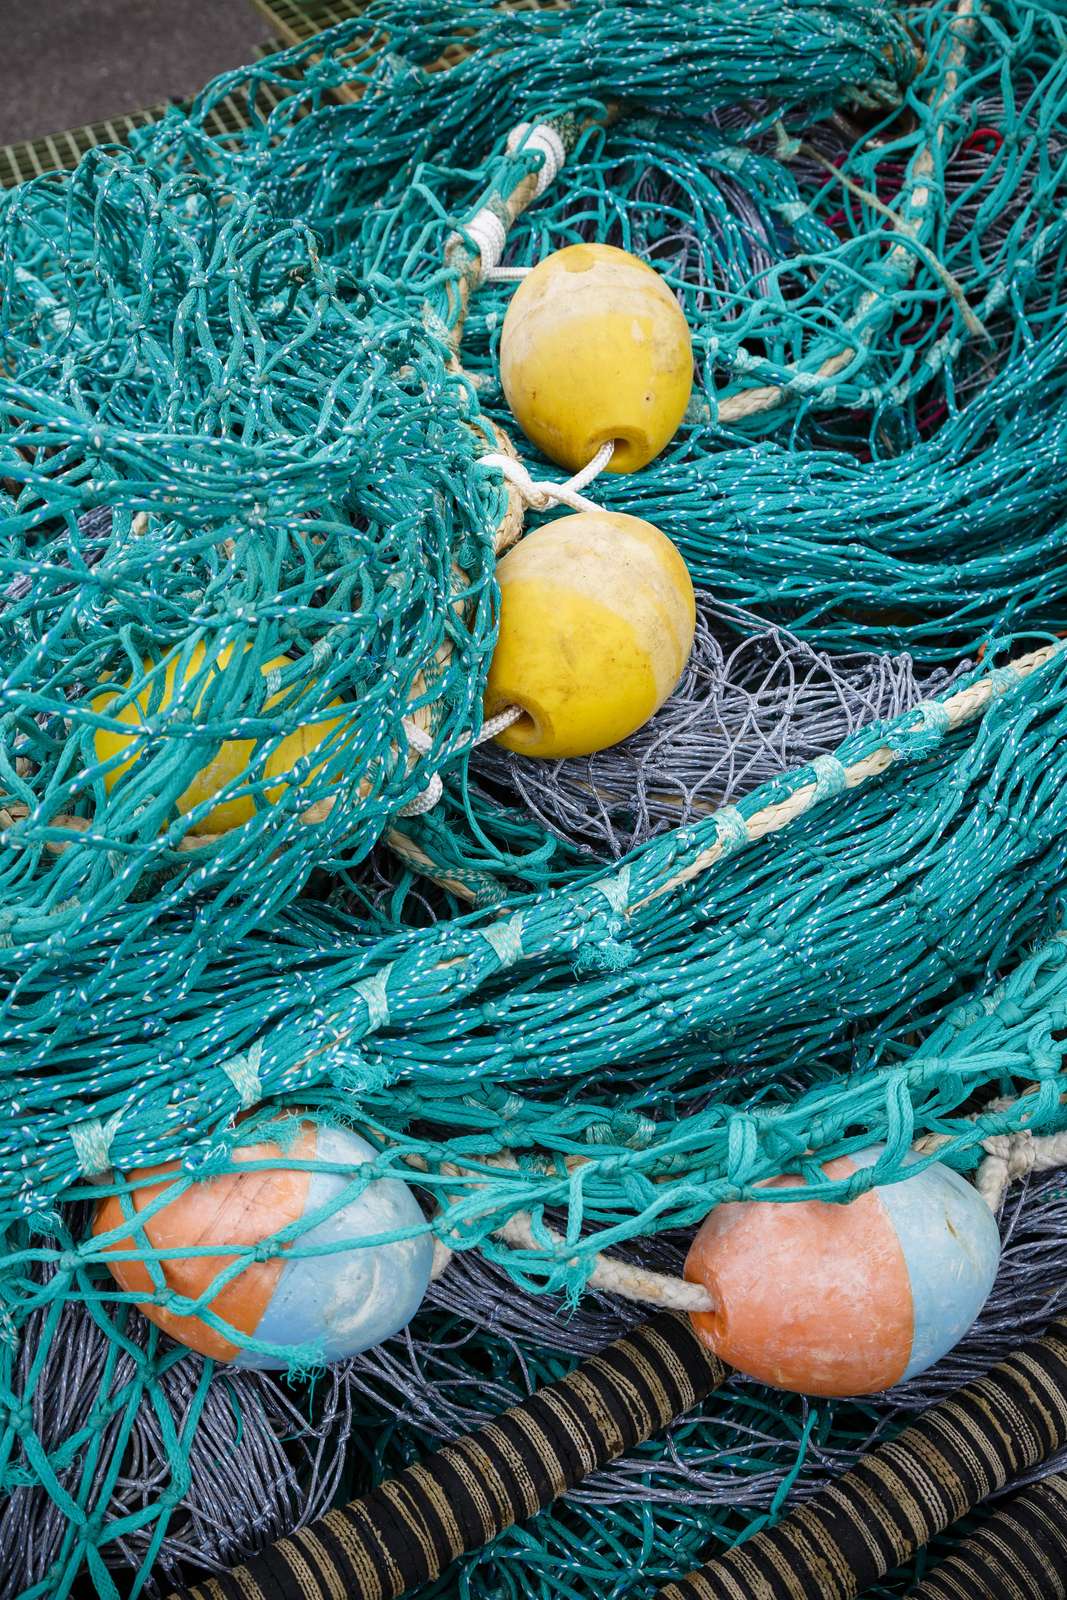 Fishing nets in Iceland